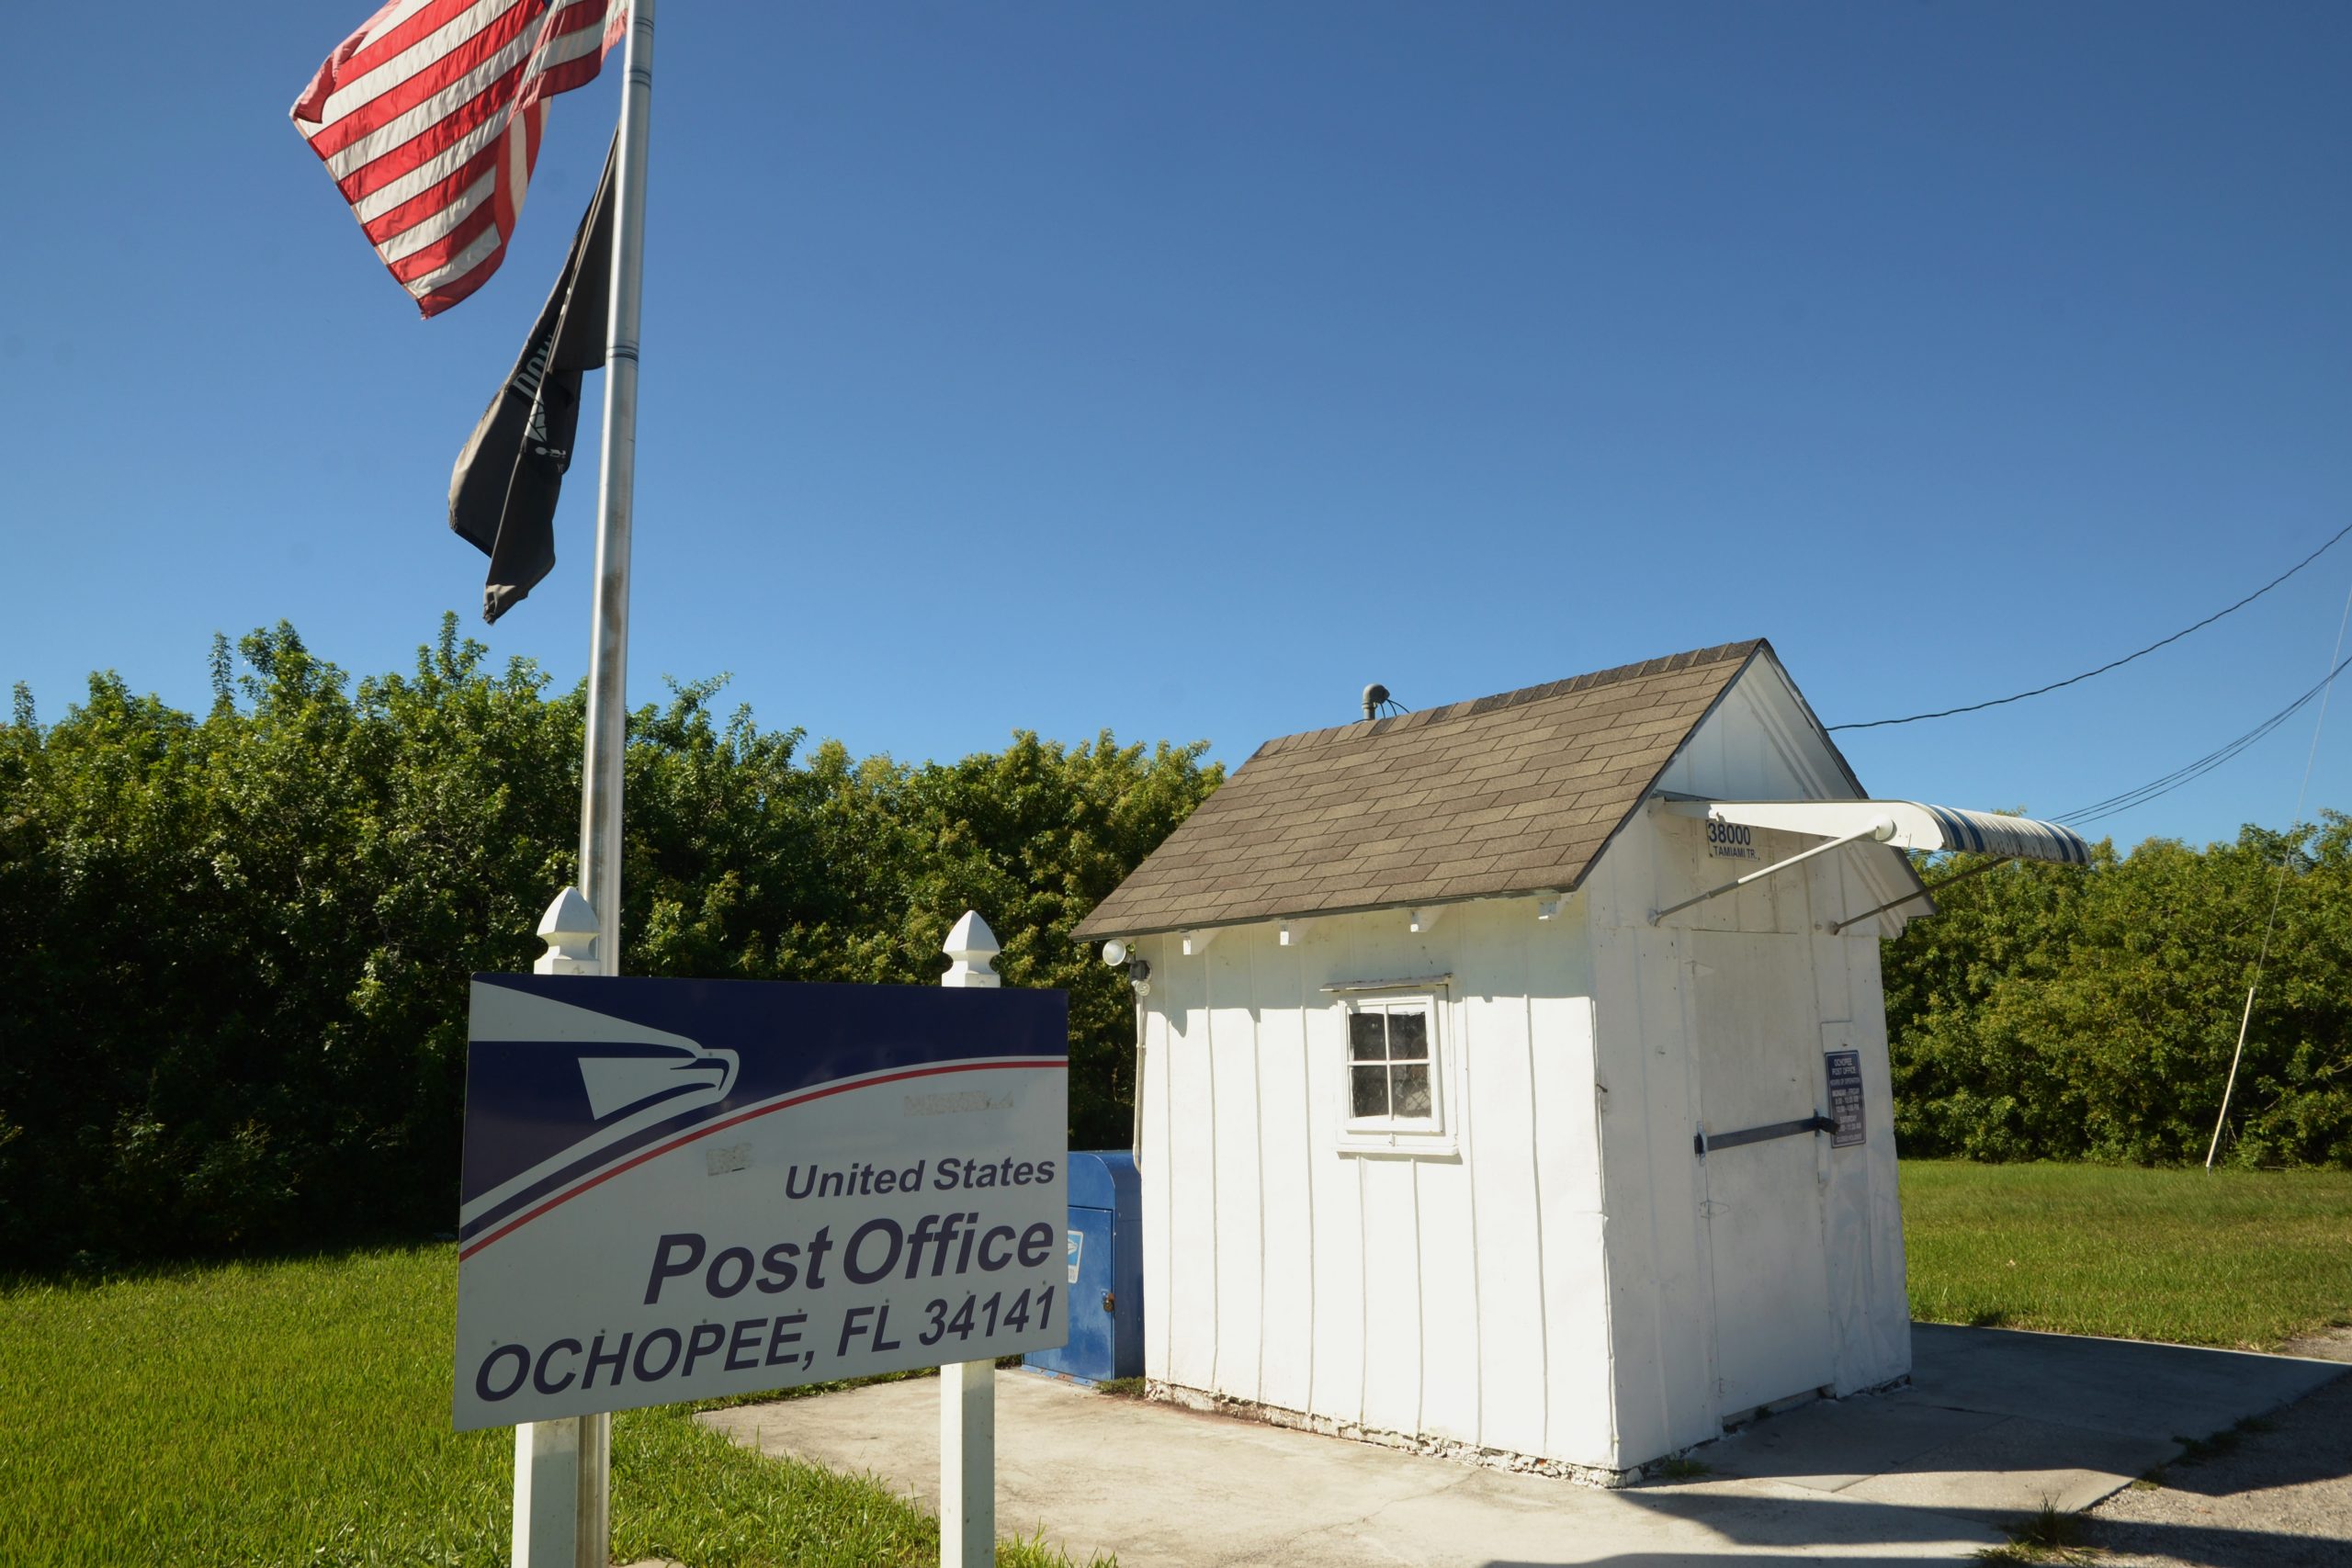 Why We Should Love the Post Office